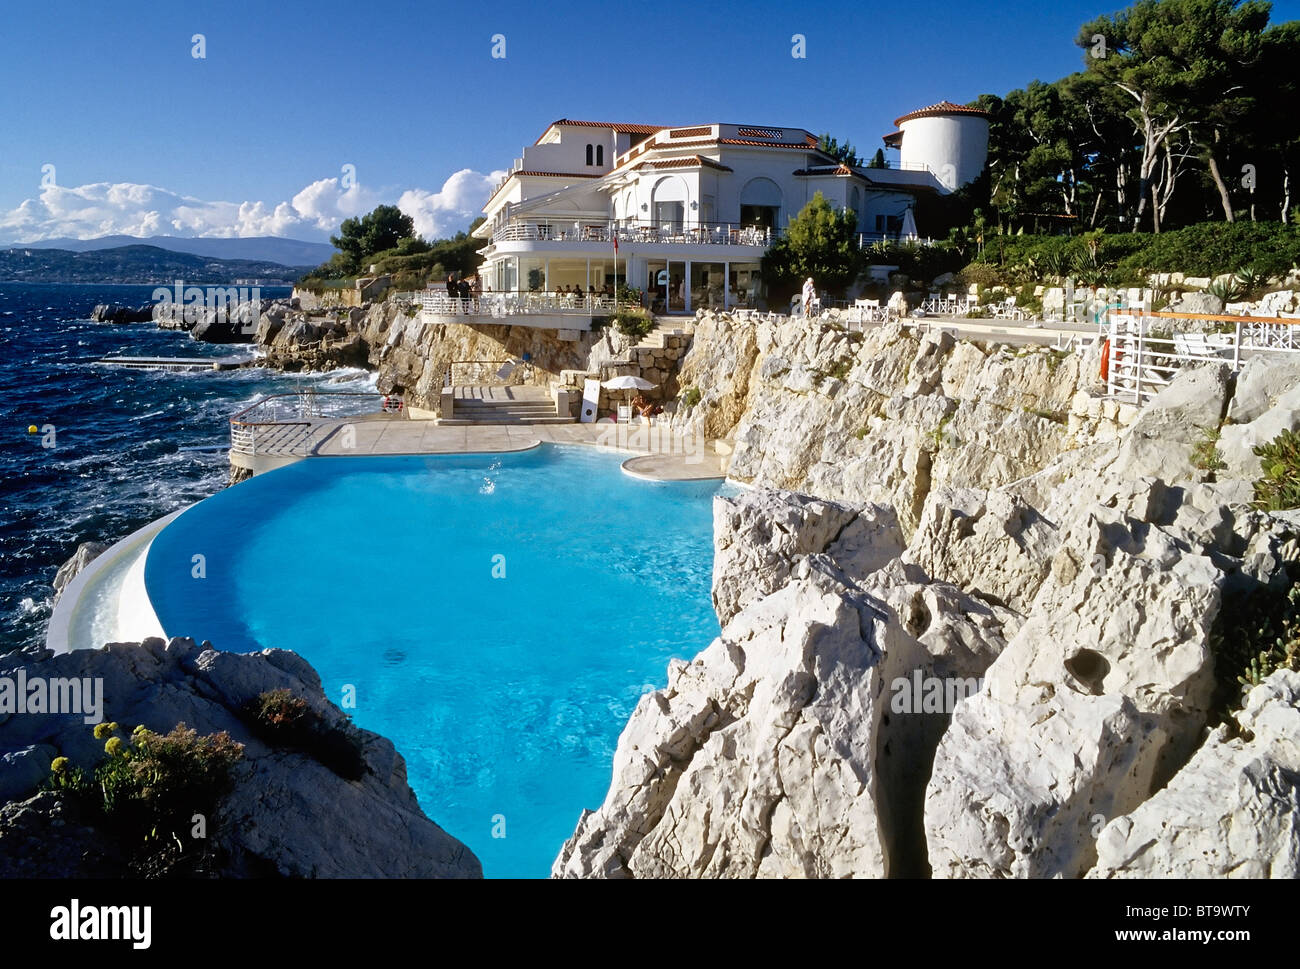 Hotel du Cap Eden Roc, restaurant pavilion and swimming pool by the sea,  southern French coast, Antibes, Cote d'Azur, Var Stock Photo - Alamy